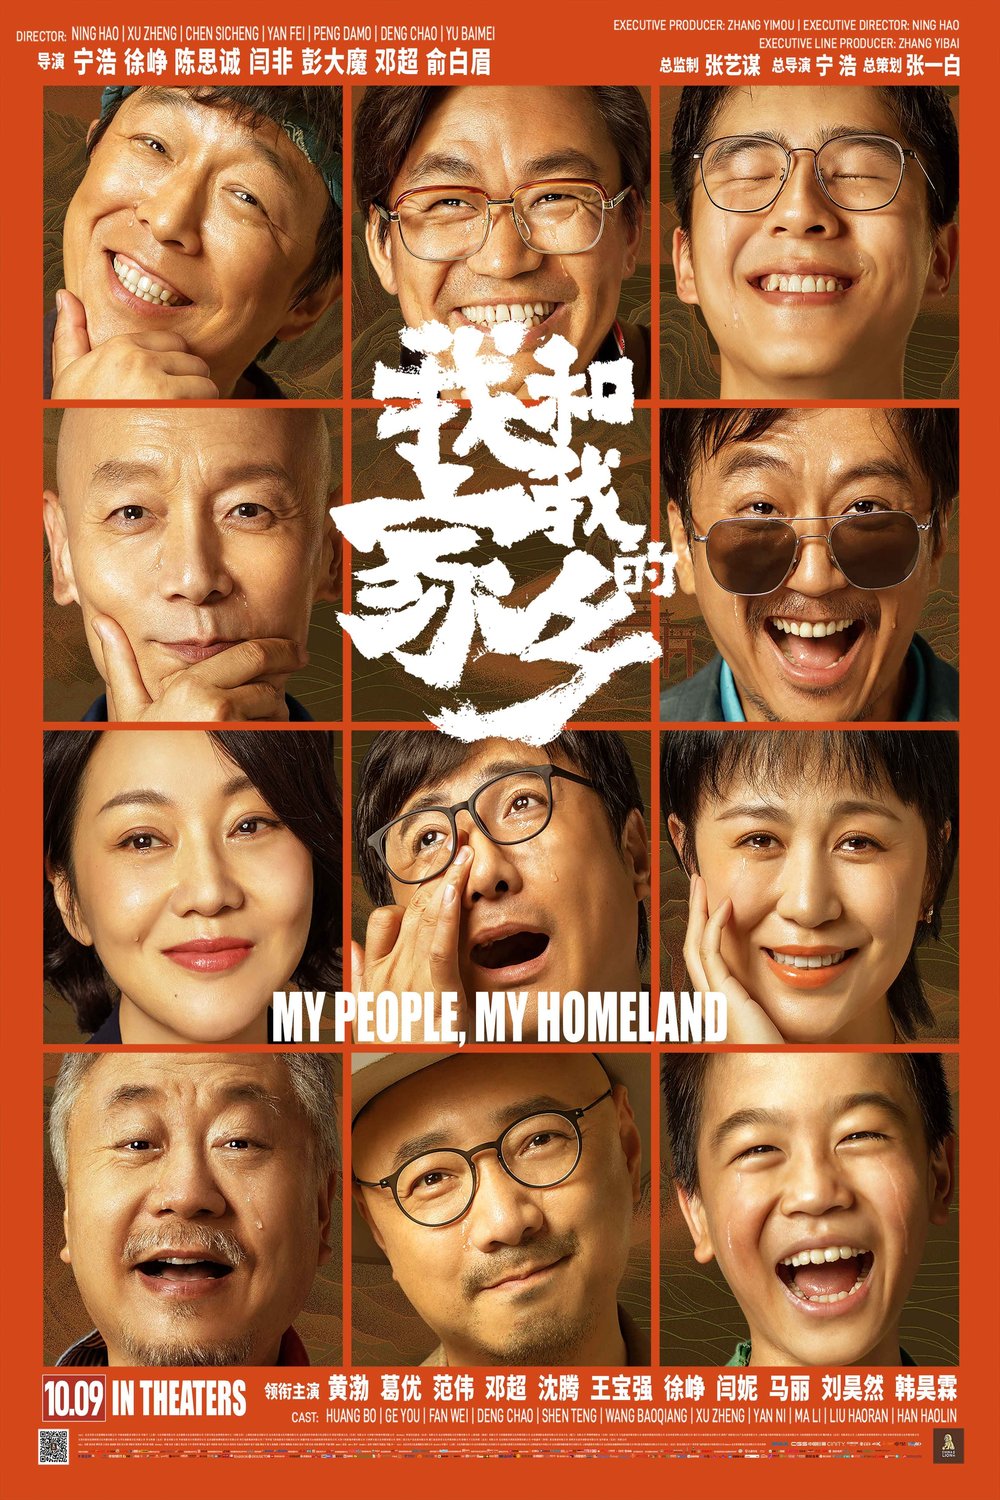 Poster of the movie My People, My Homeland